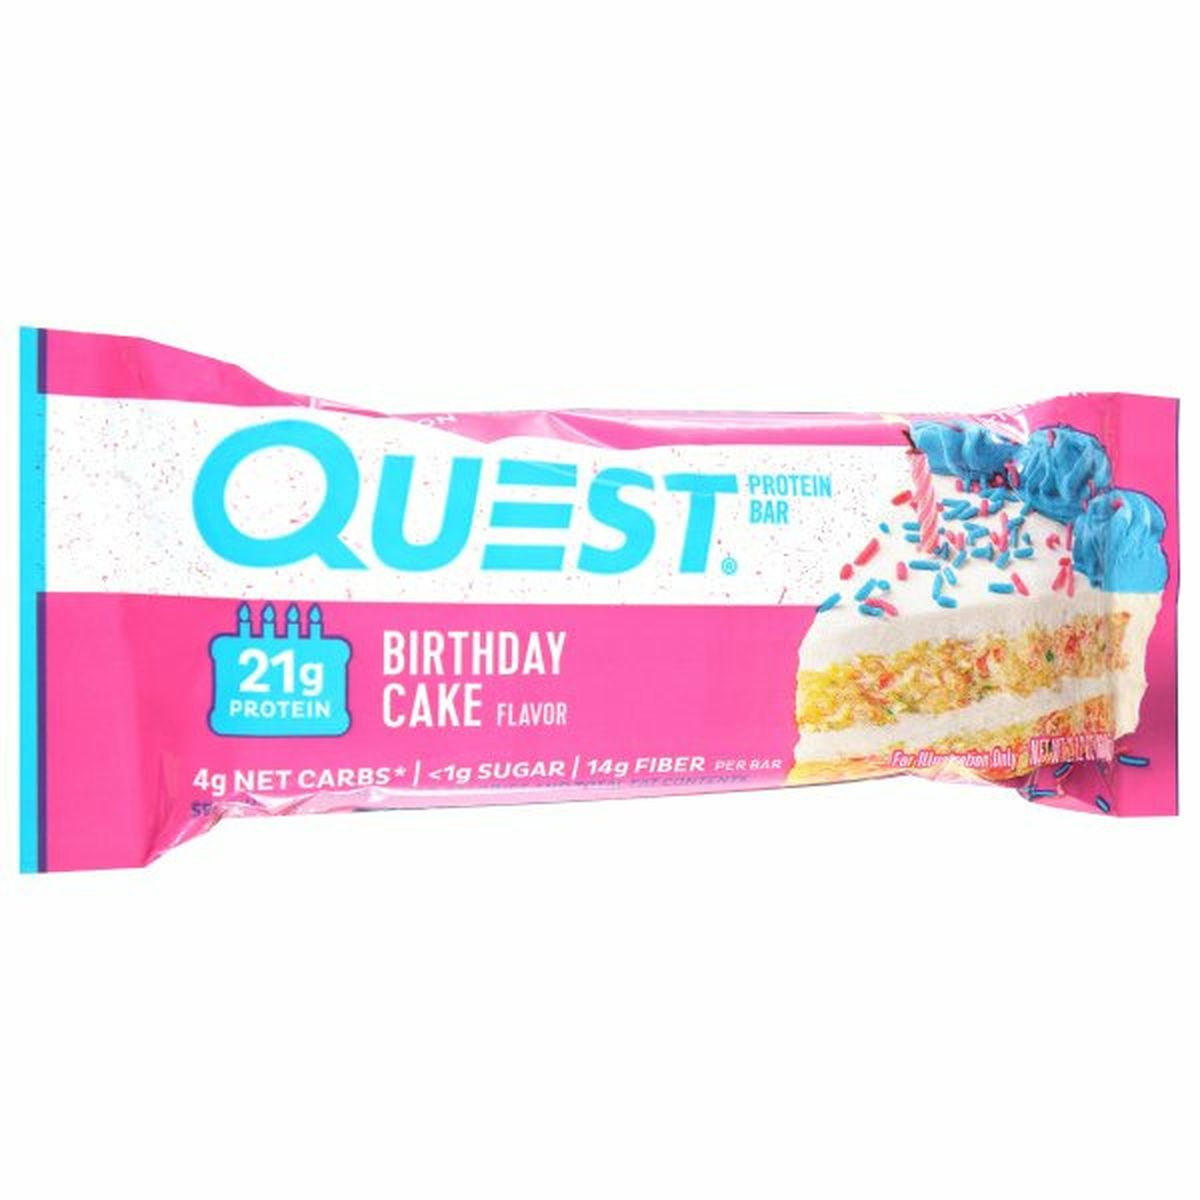 Calories in Quest Protein Bar, Birthday Cake Flavor